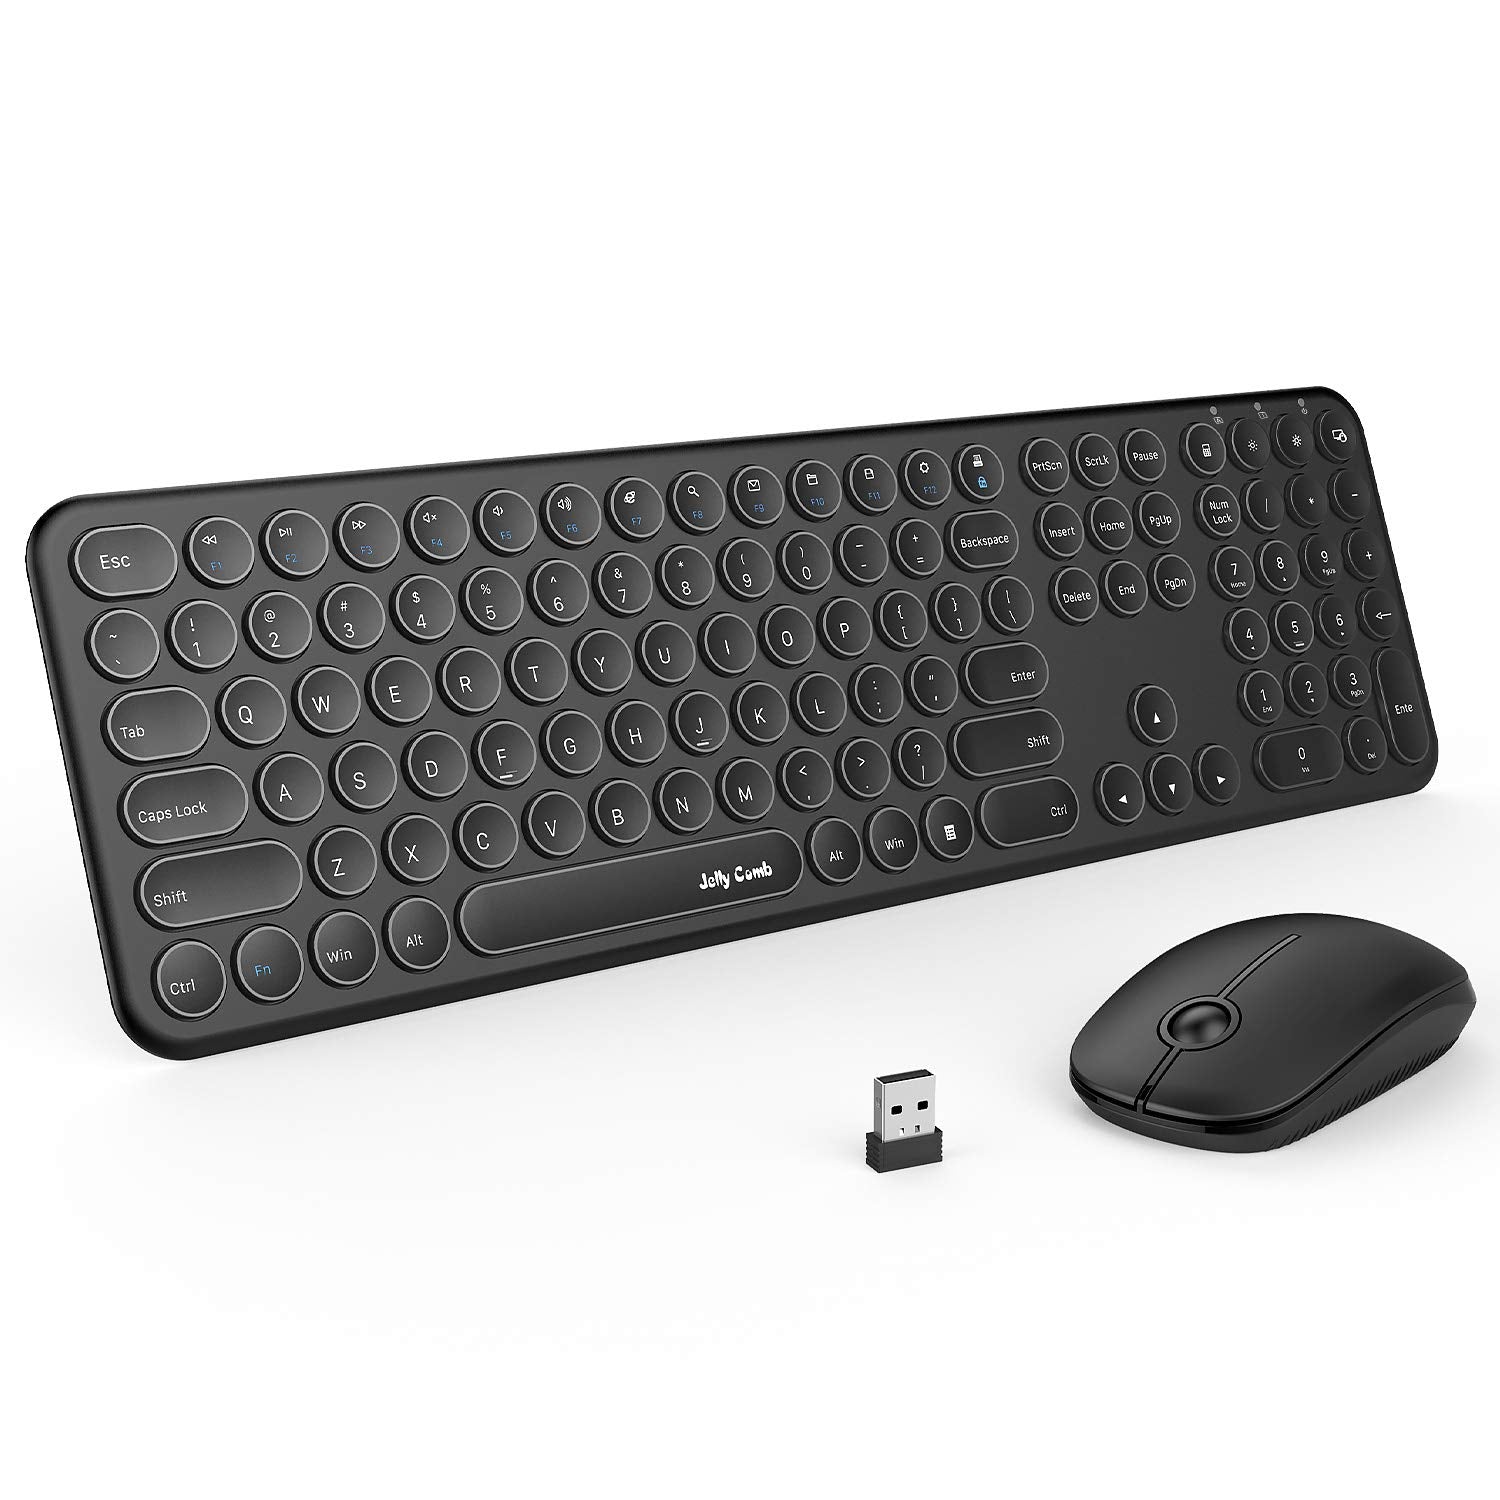 Jelly Comb 2.4GHz Full-Size Compact Wireless Mouse Keyboard. (LNC)